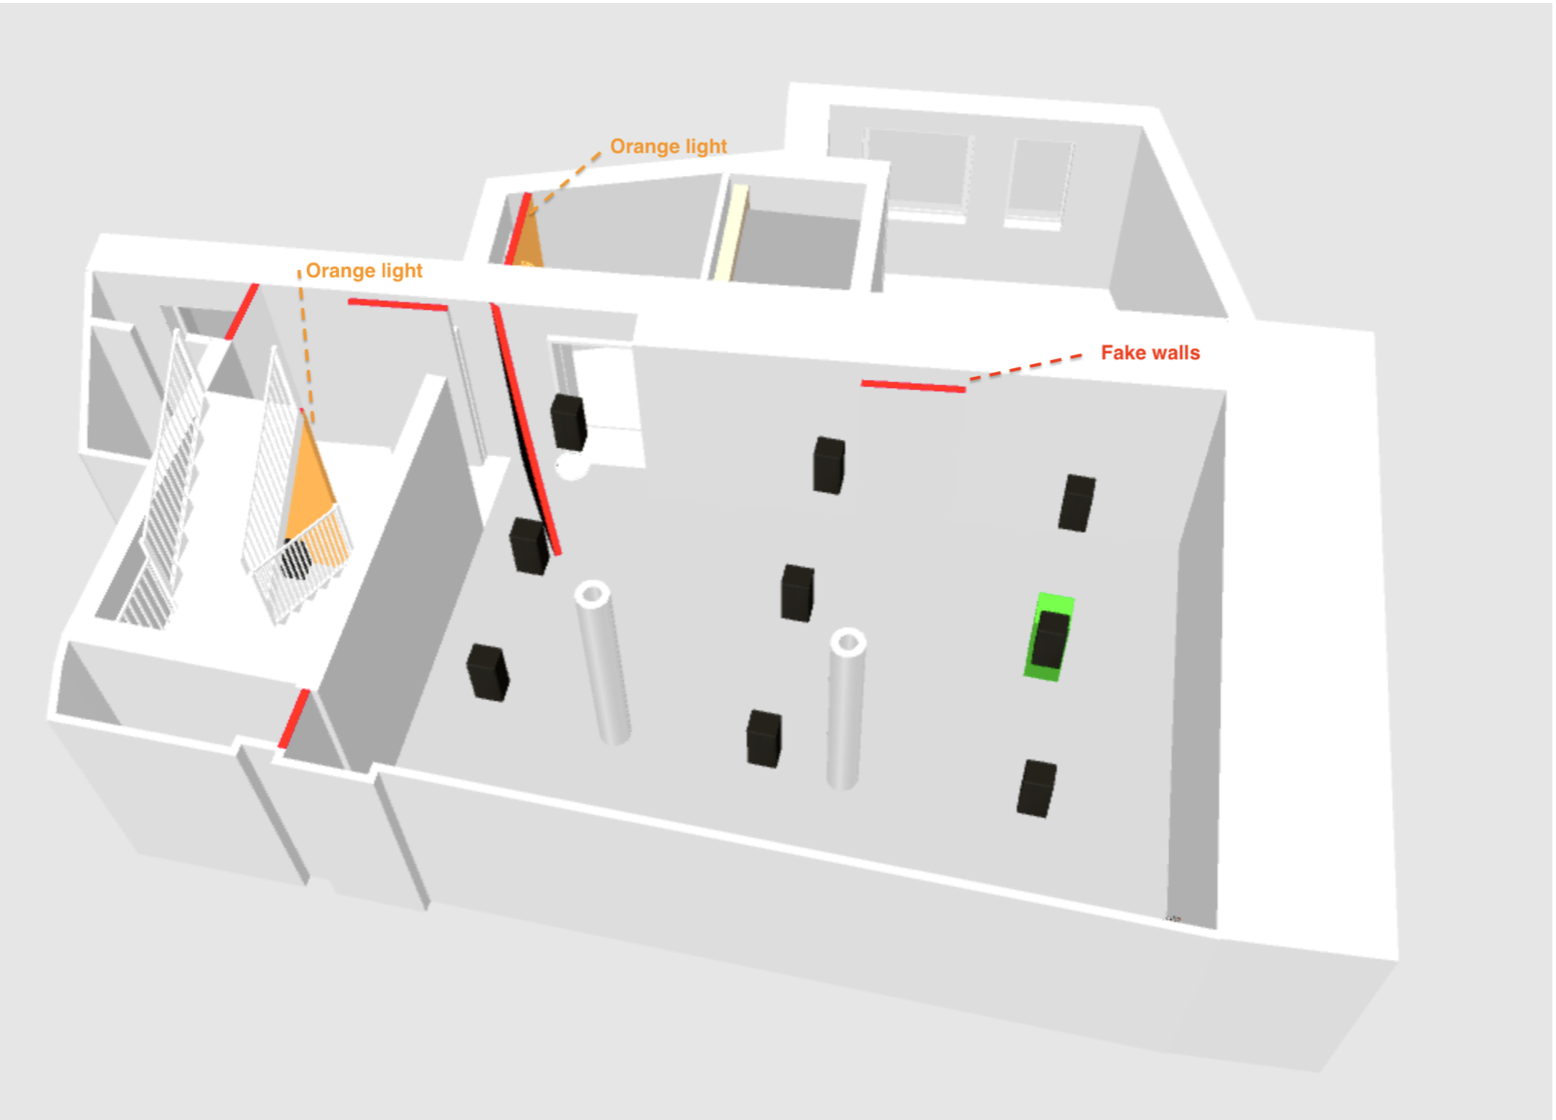 Intervention in space. Removal of architectural elements. Fake walls (red), Orange lights in preliminary rooms (orange).